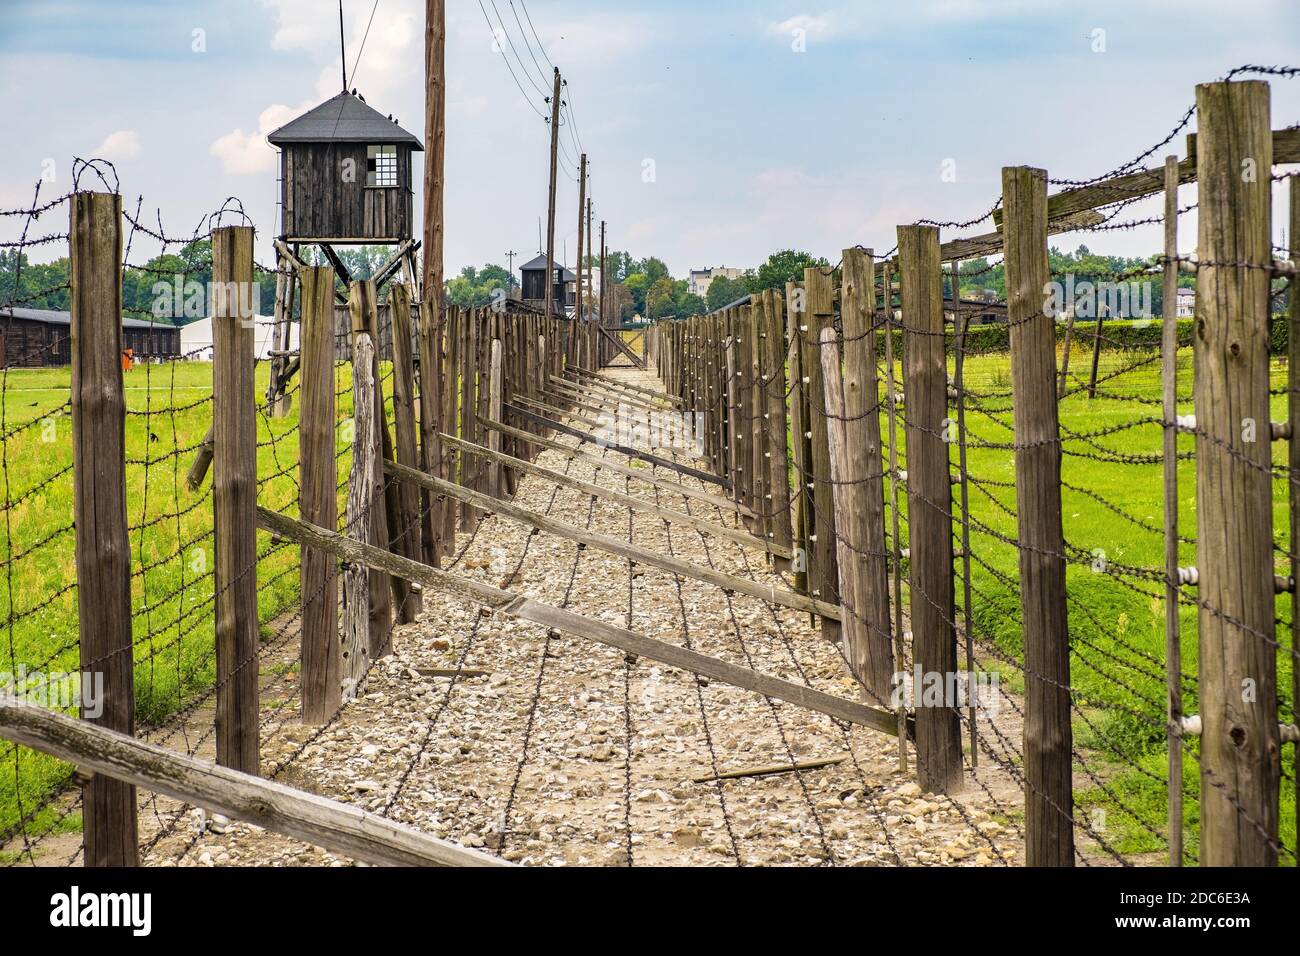 Lublin, Lubelskie / Poland - 2019/08/17: Barbed-wire fences of the Majdanek KL Lublin Nazis concentration and extermination camp - Konzentrationslager Stock Photo